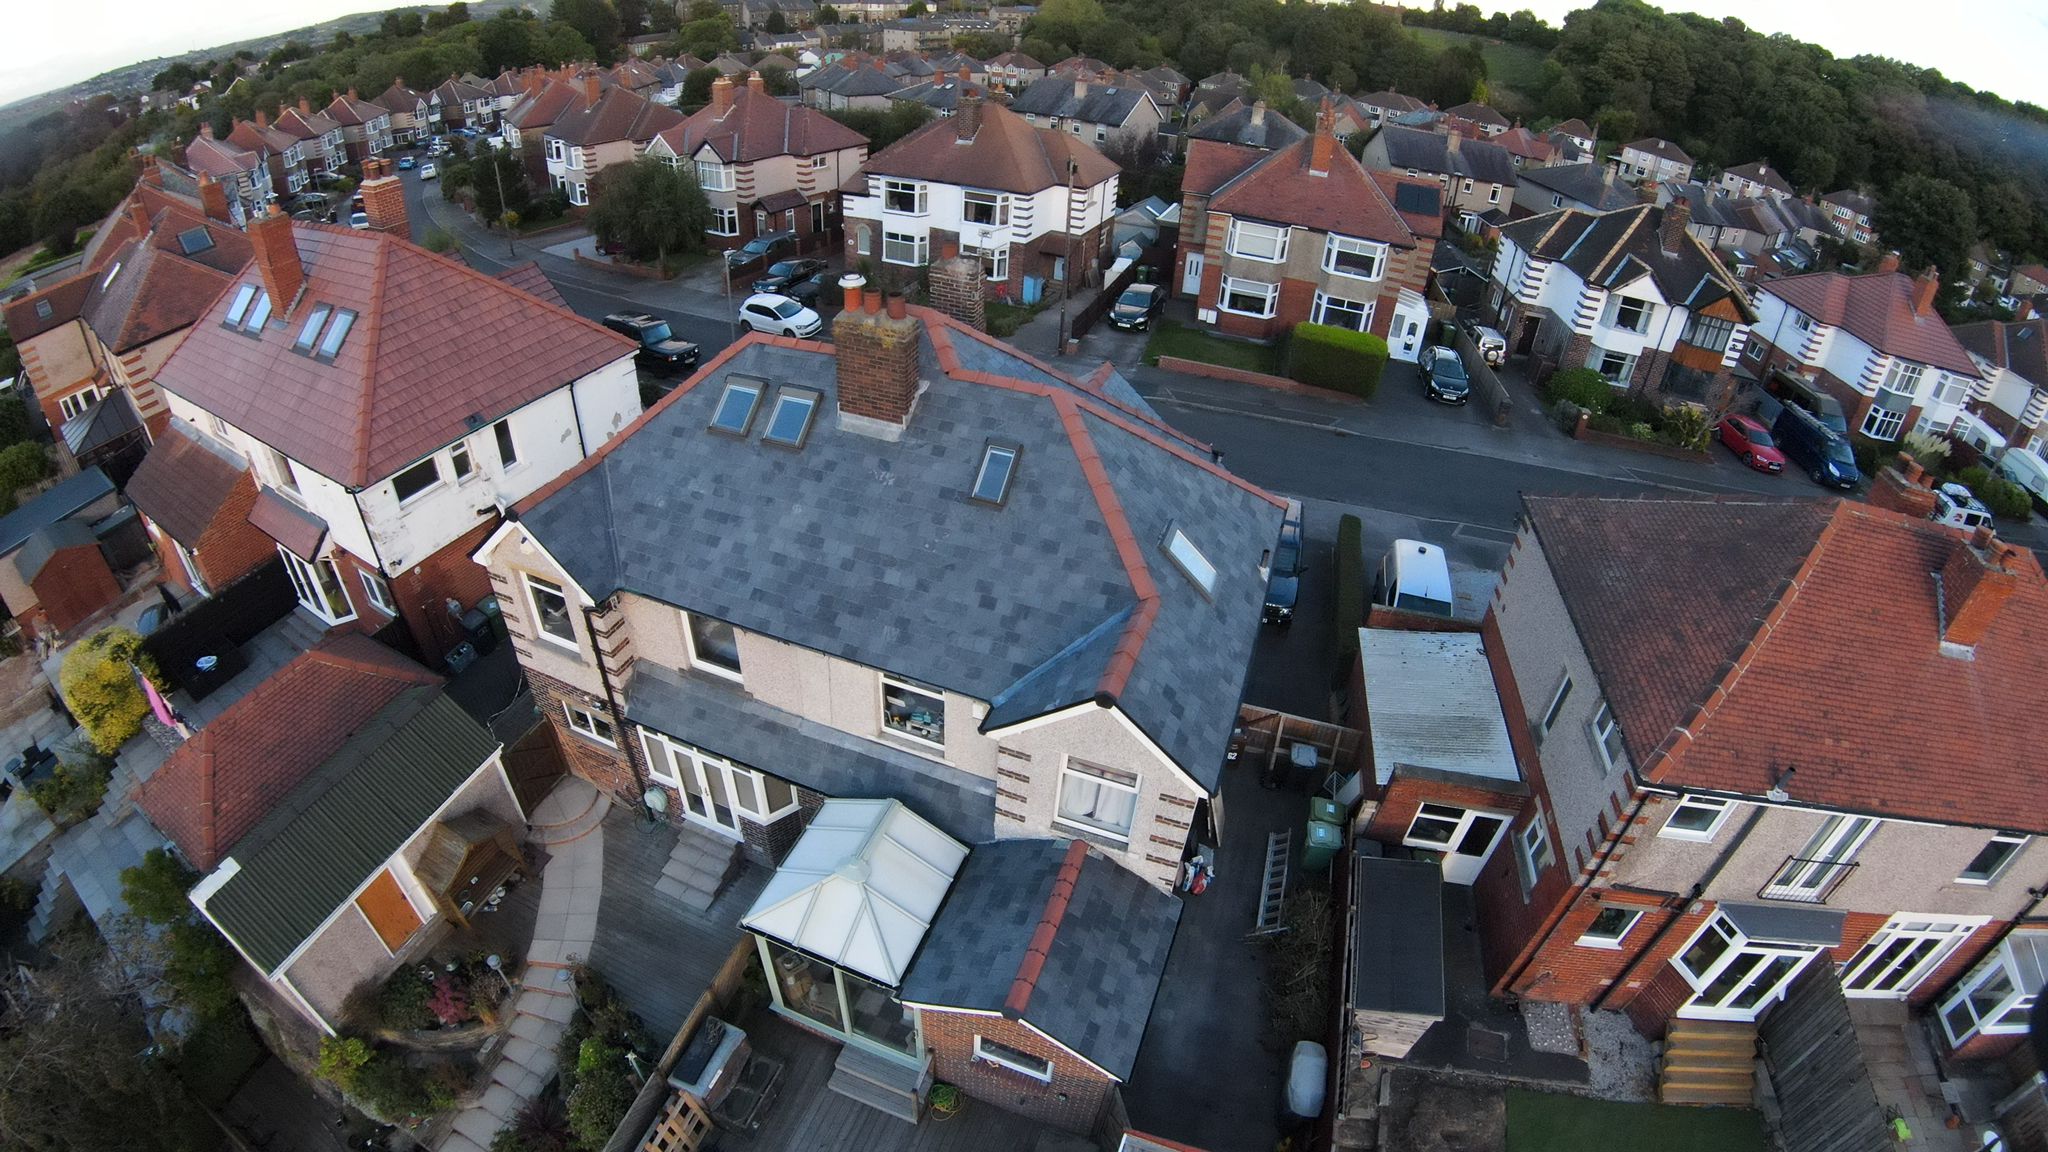 Roof Repair services in Huddersfield, West Yorkshire